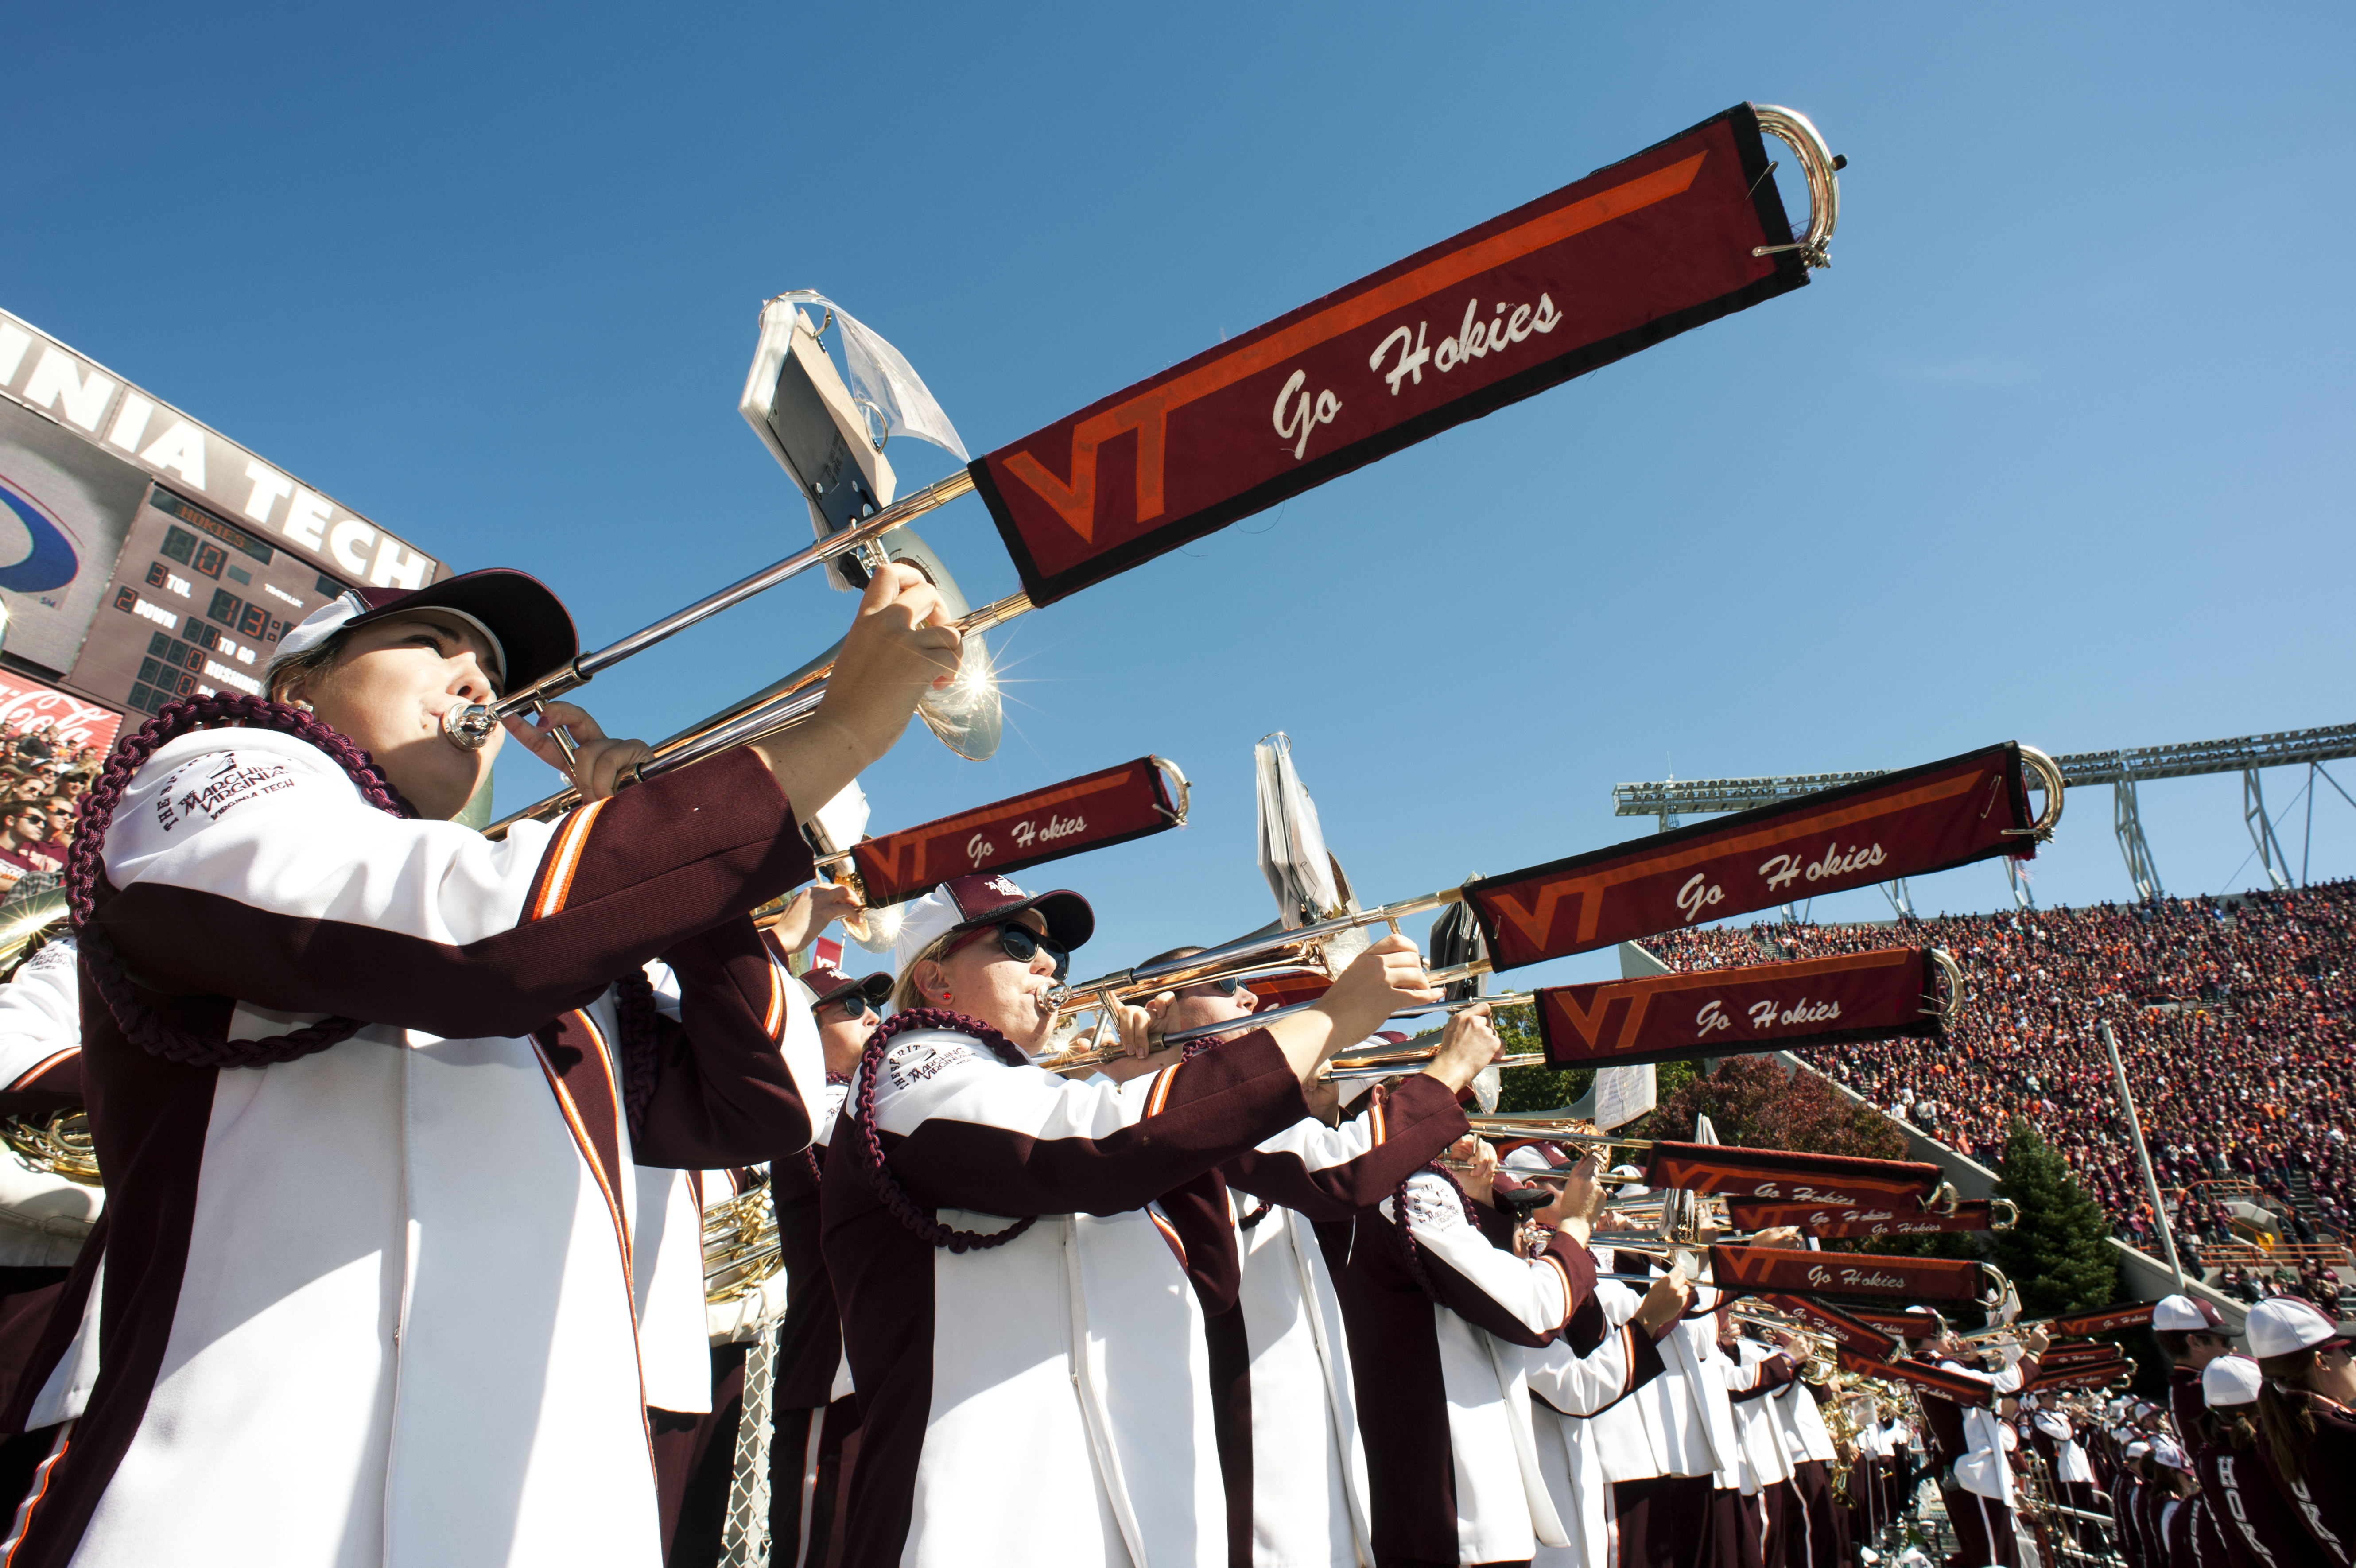 Virginia Tech's marching band, the Marching Virginians